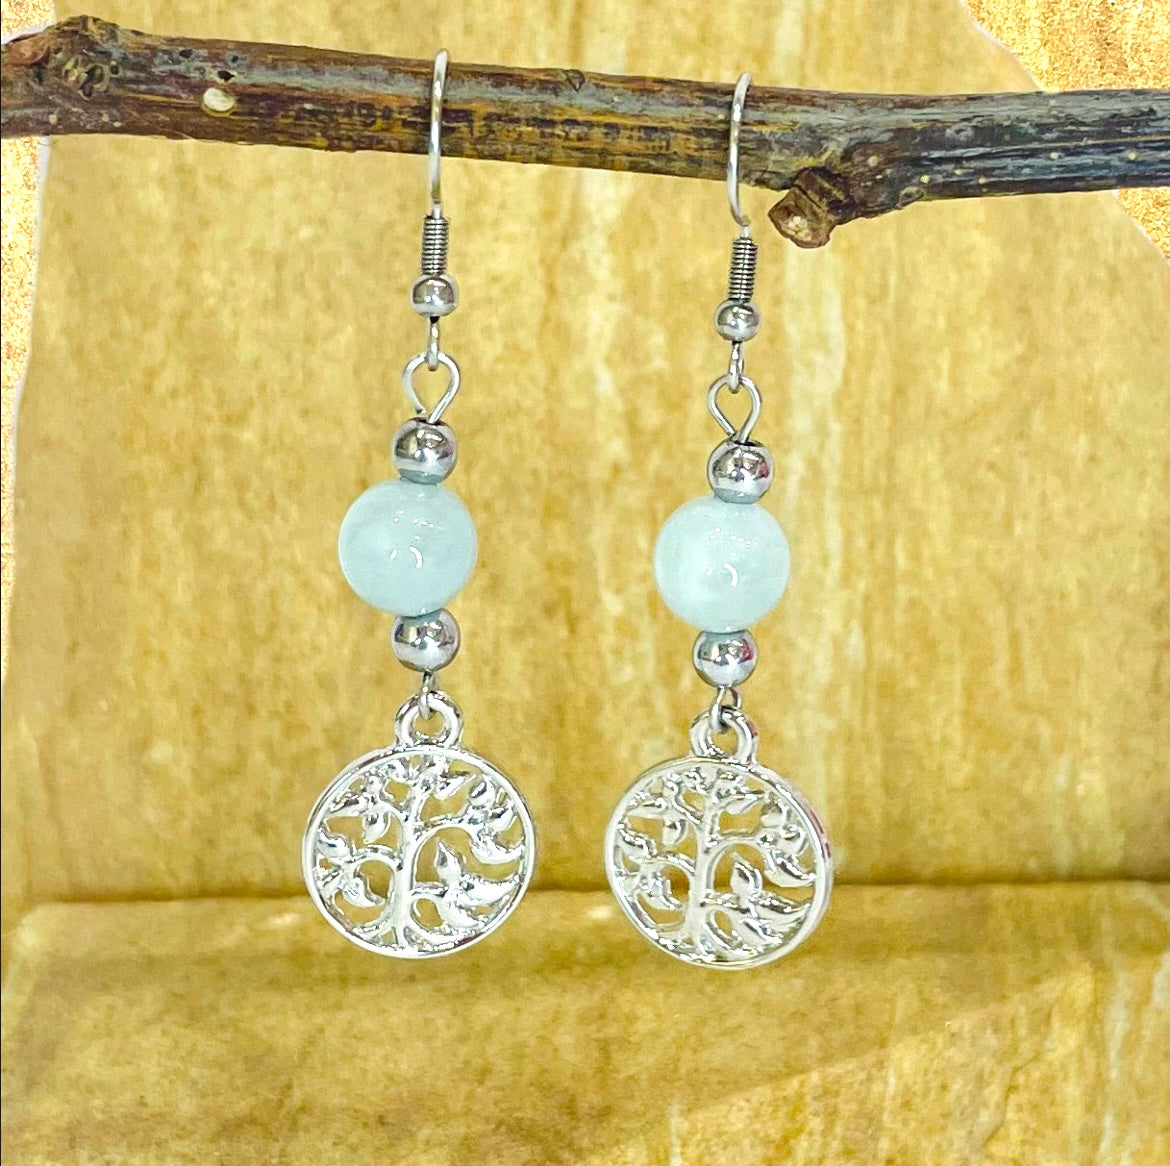 Aquamarine 8mm crystal bead drop earring with silver tree of life charm